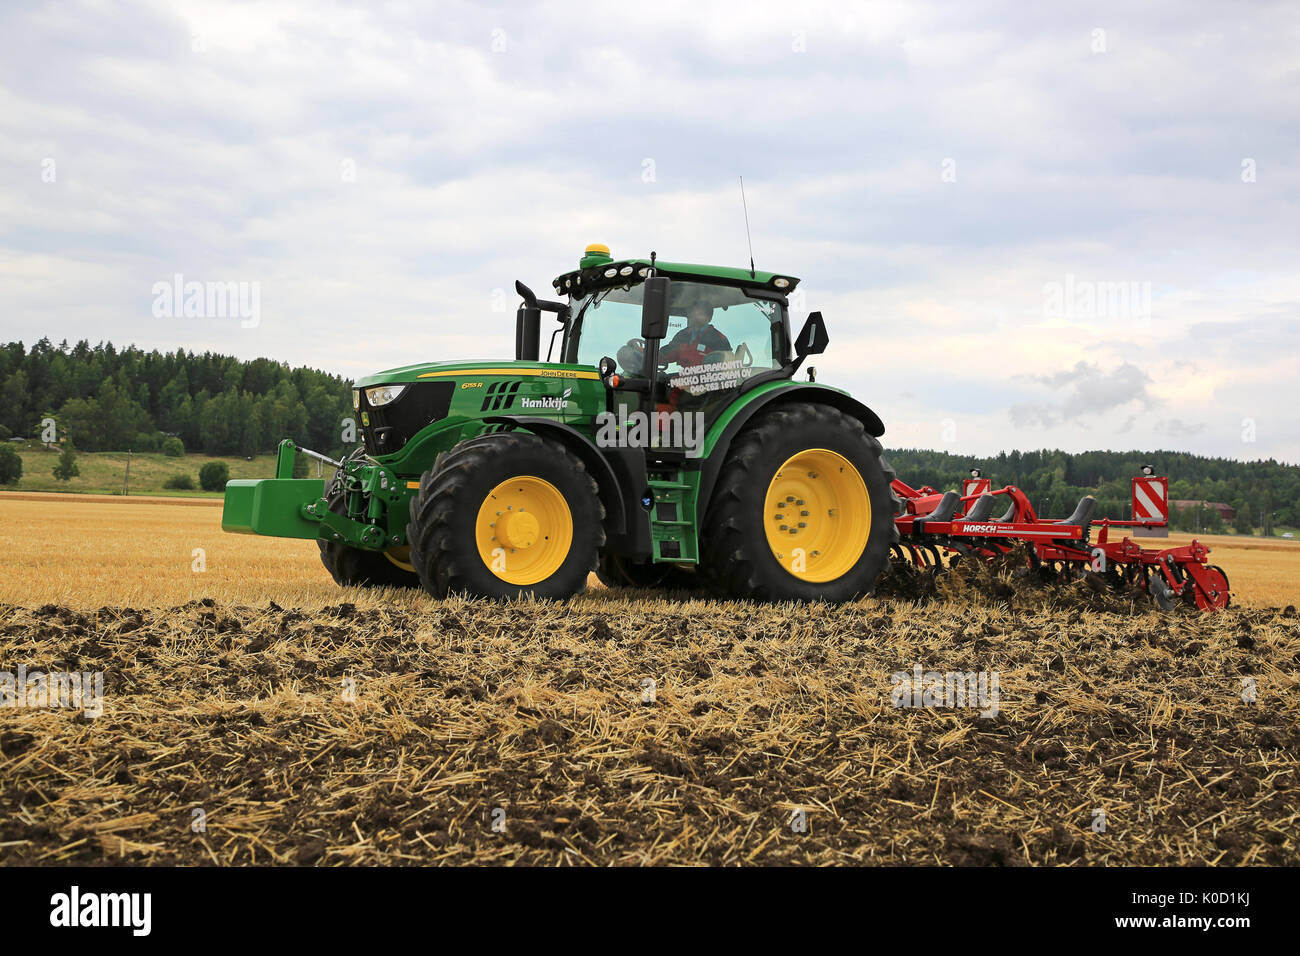 SALO, FINLAND - AUGUST 18, 2017: Farmer works with John Deere 6155R tractor and Horsch Terrano 3FX cultivator on Puontin Peltopaivat 2017 Agricultural Stock Photo